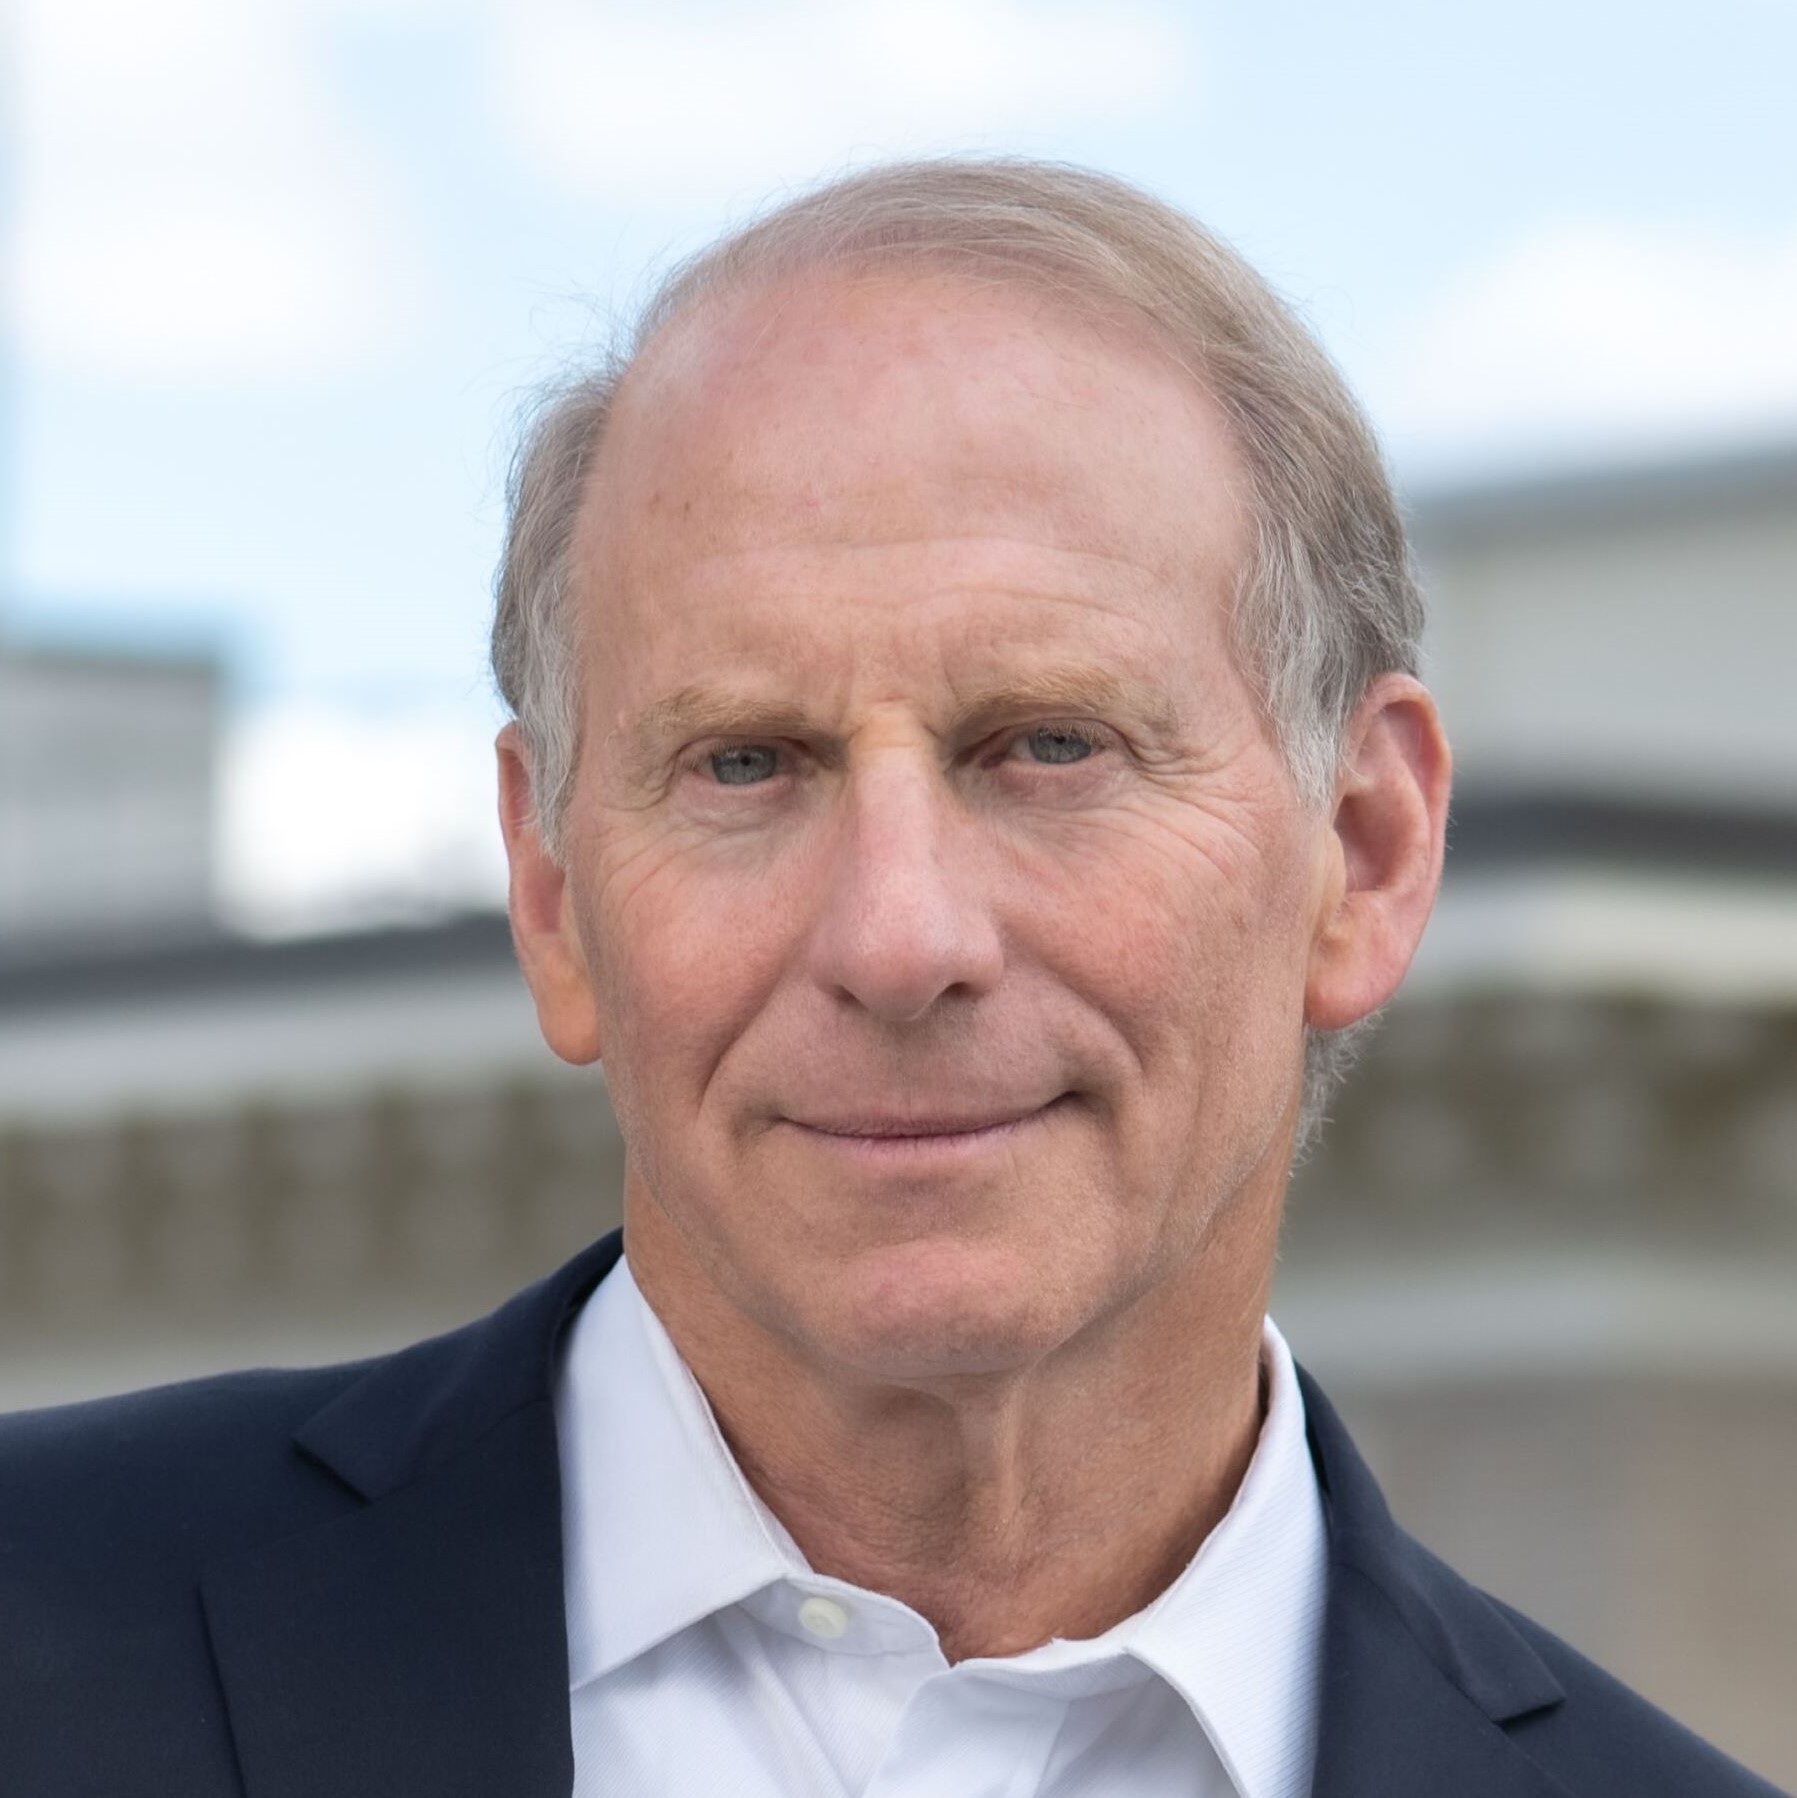 Monday, July 13th: The World: A Conversation with Richard Haass, President of the Council on Foreign Relations "Making Sense of a World in Crisis -- Through the Eyes of a Foreign Policy Expert"